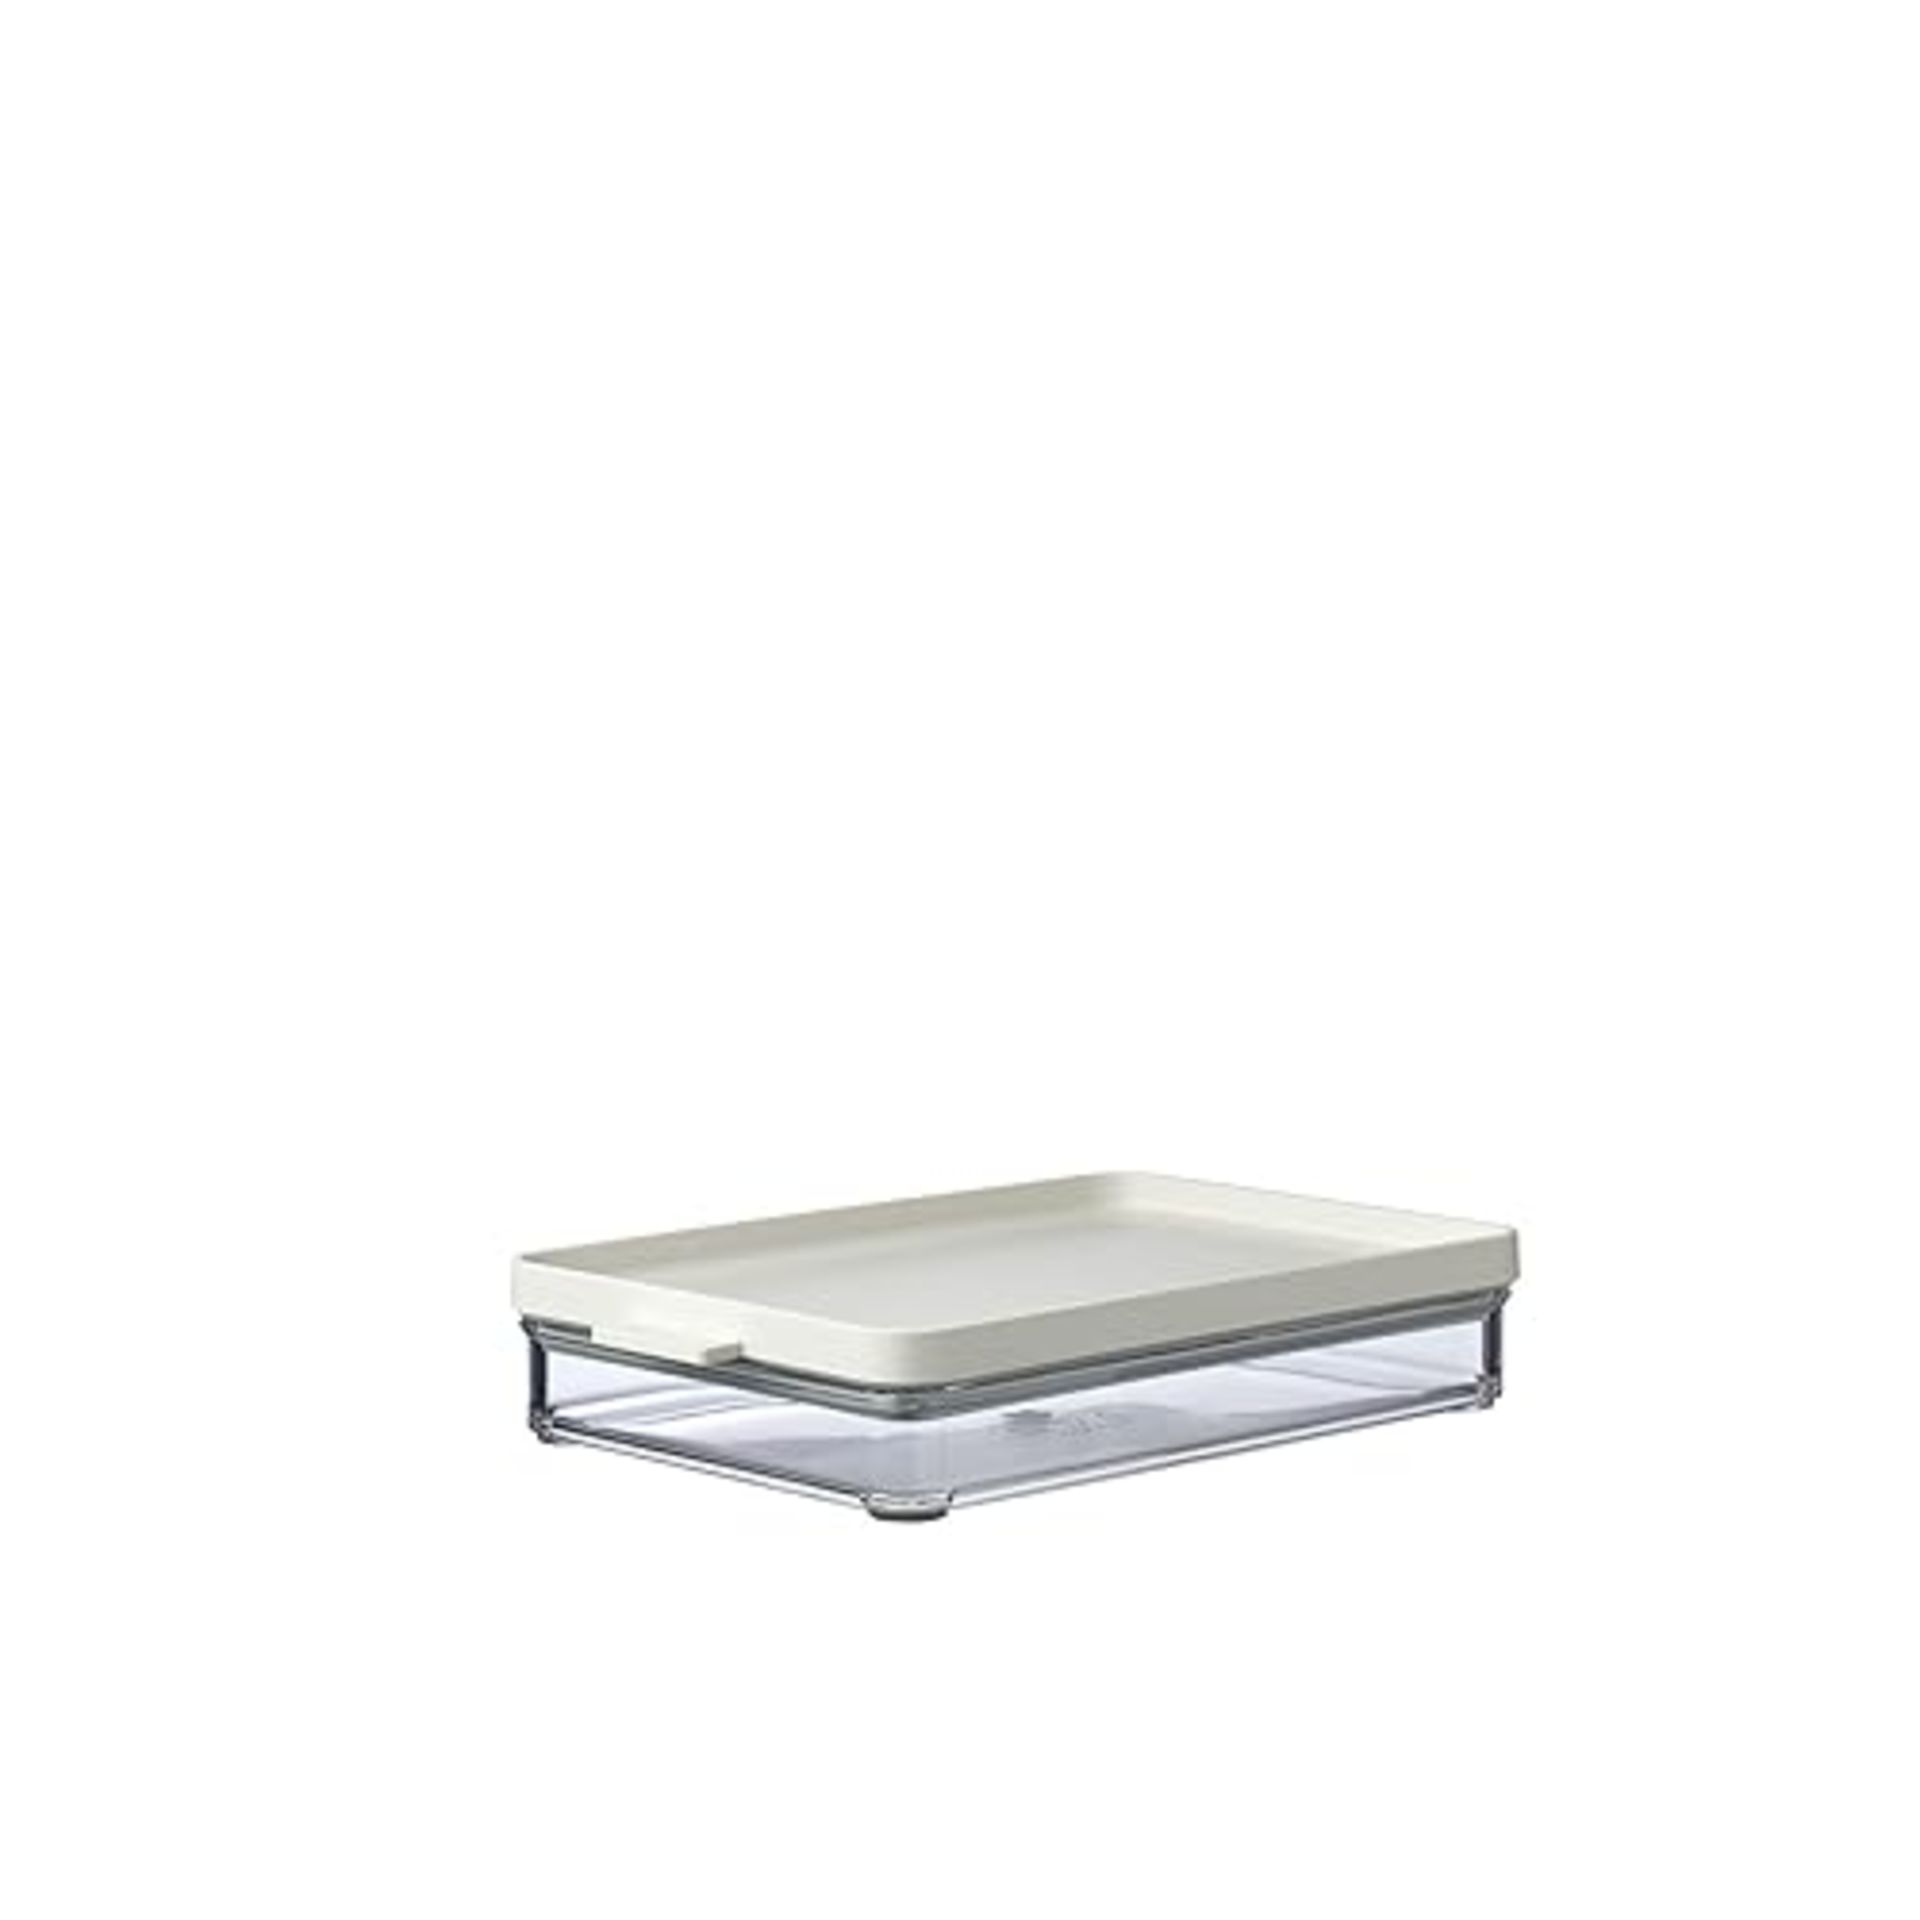 Mepal - Fridge box Omnia cold cuts box Nordic white - Practical storage box for various meat produc